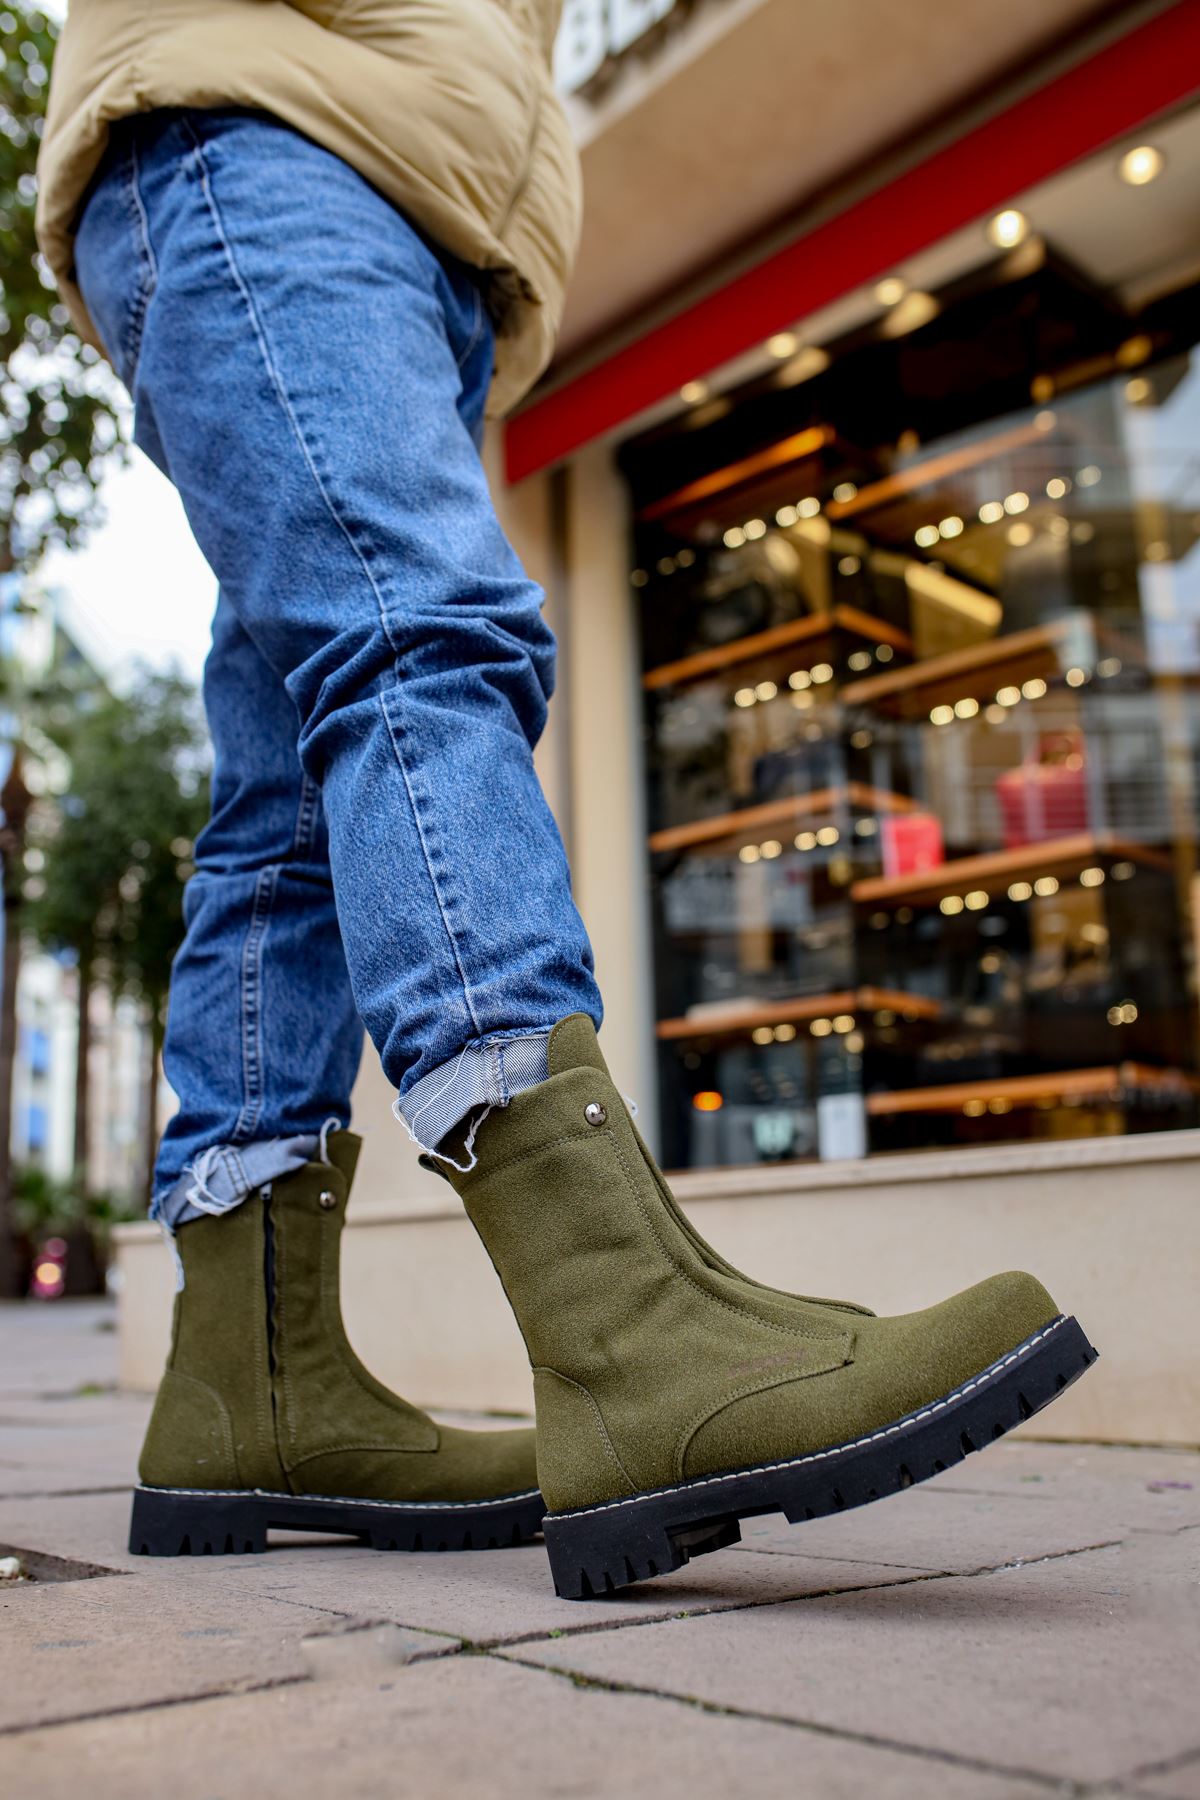 CH027 Men's Suede Khaki-Black Sole Casual Winter Boots - STREETMODE ™